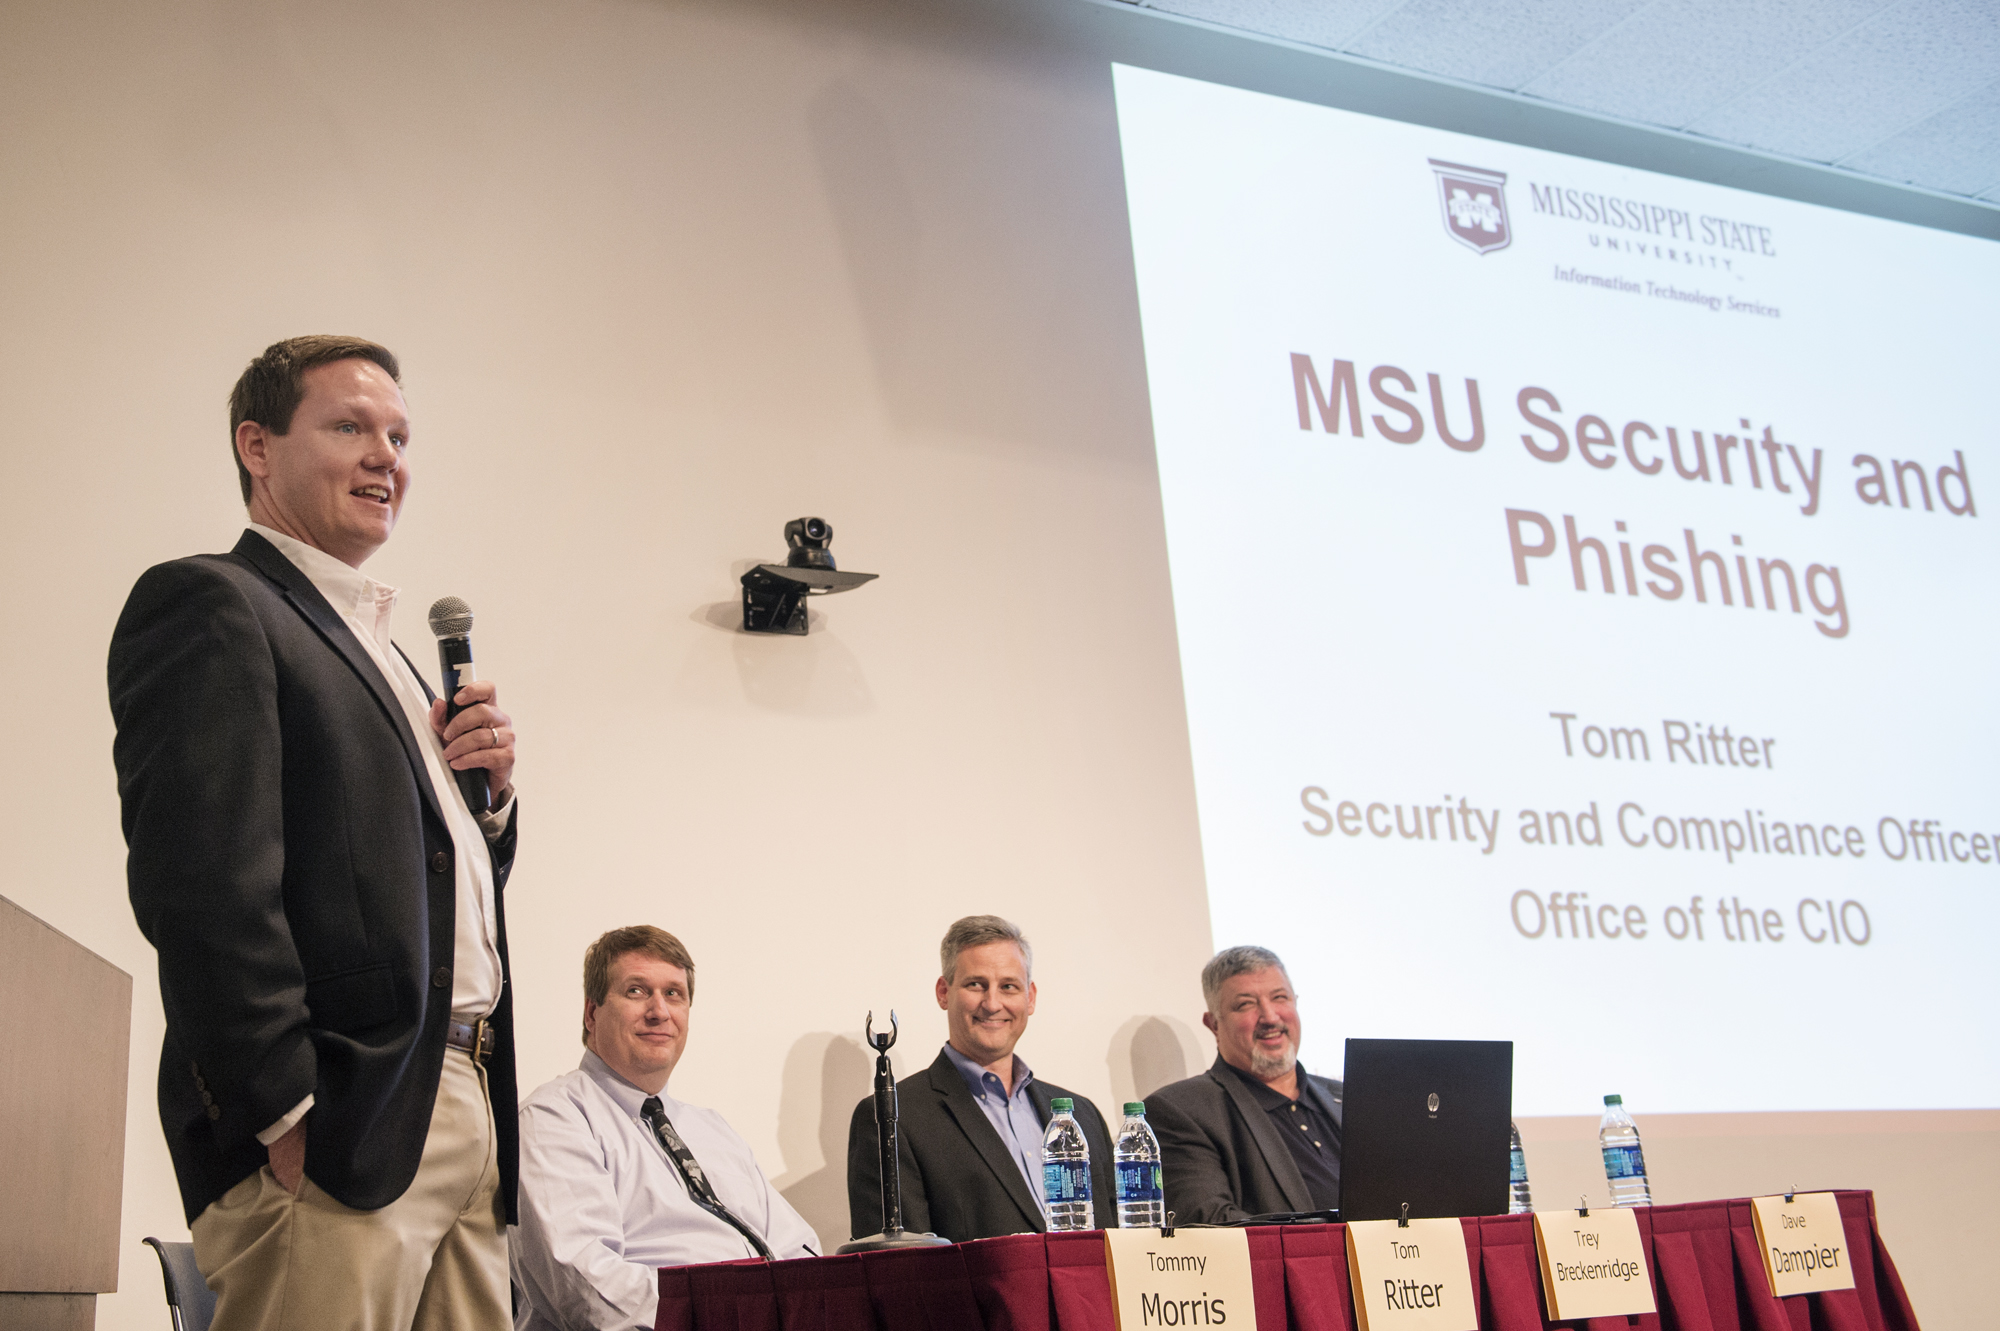 Mississippi State University hosted an expert panel on Thursday as part of Cybersecurity Awareness Week. Tommy Morris, standing, associate professor and associate director of MSU's Distributed Analytics and Security Institute, takes a question from the audience. Seated, from left, are panelists Tom Ritter, campus security and compliance officer; Trey Breckenridge, director of MSU's Portera High Performance Computing Center; and Dave Dampier, professor and director of DASI.